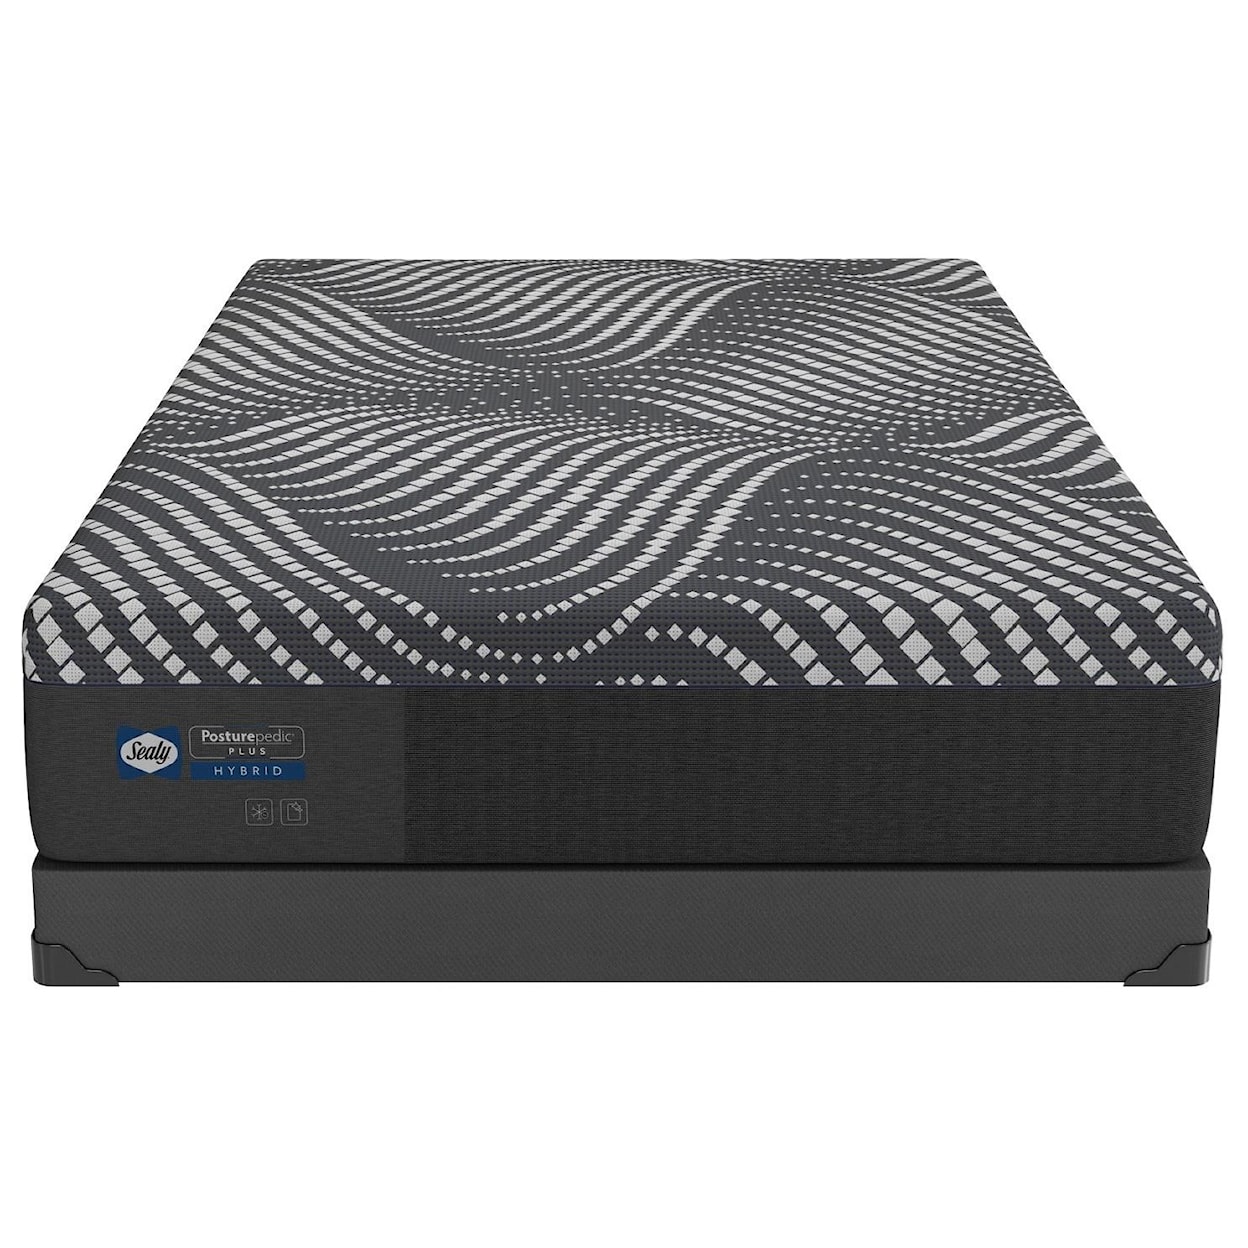 Sealy Sealy Hybrid Queen High Point Soft Mattress+LoPro Base